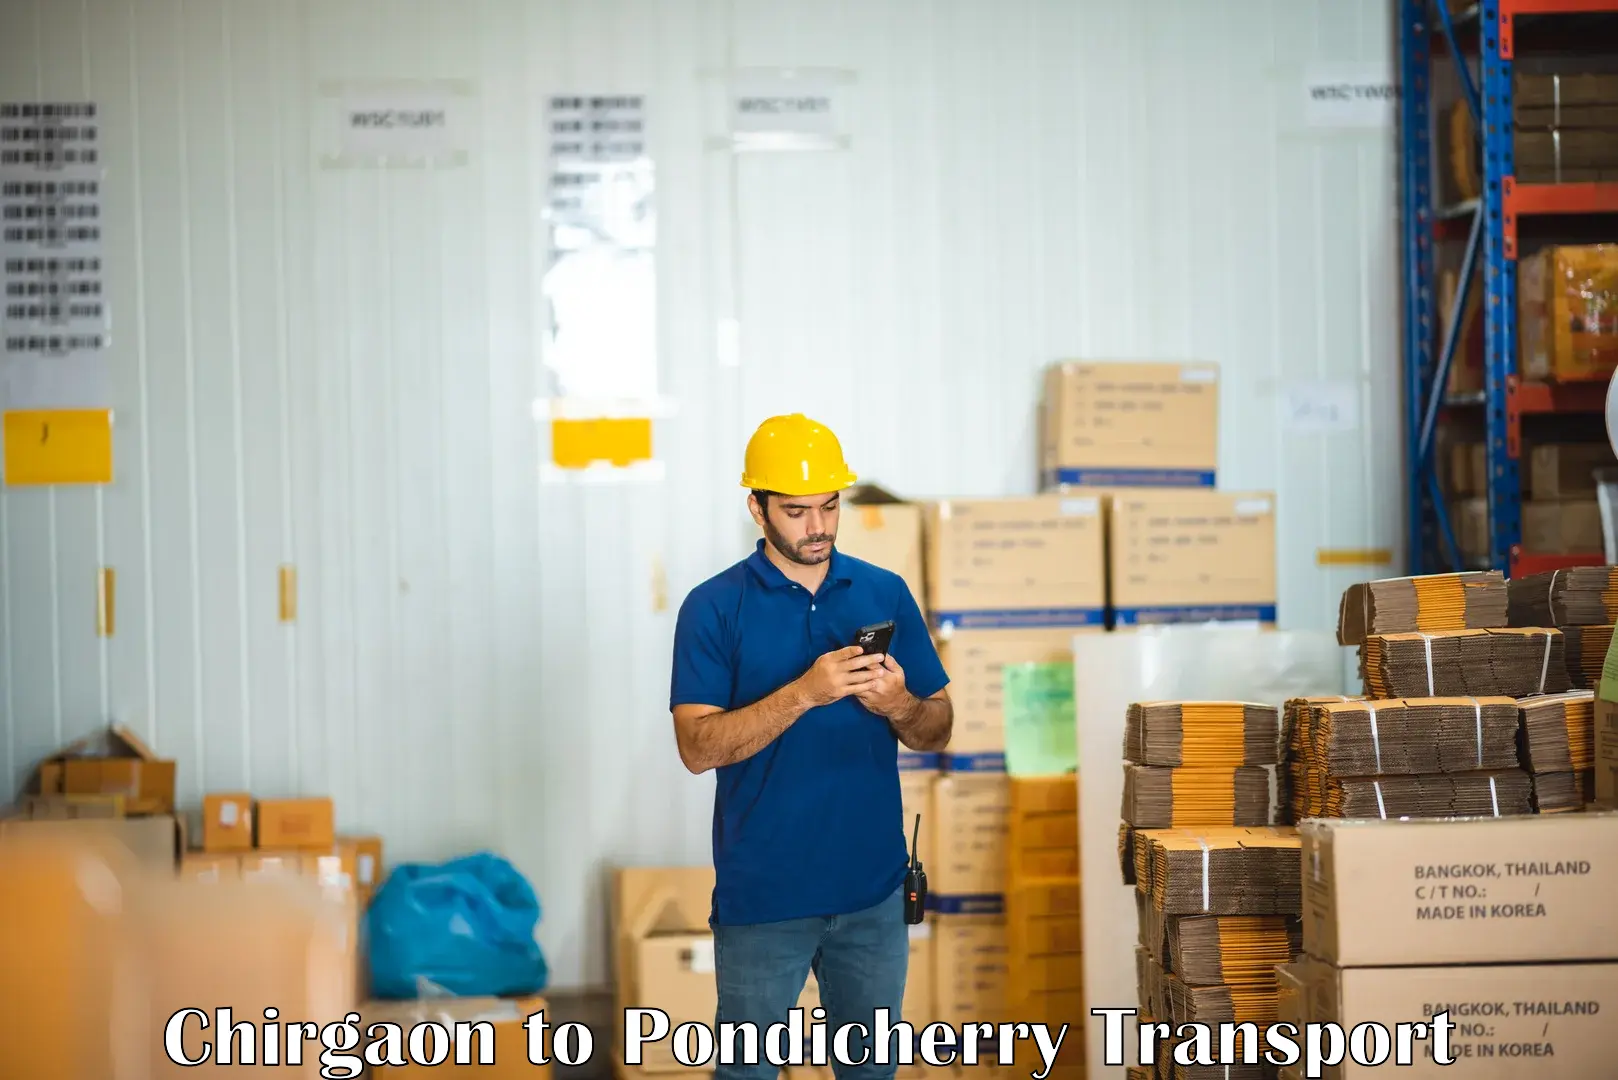 Delivery service Chirgaon to Pondicherry